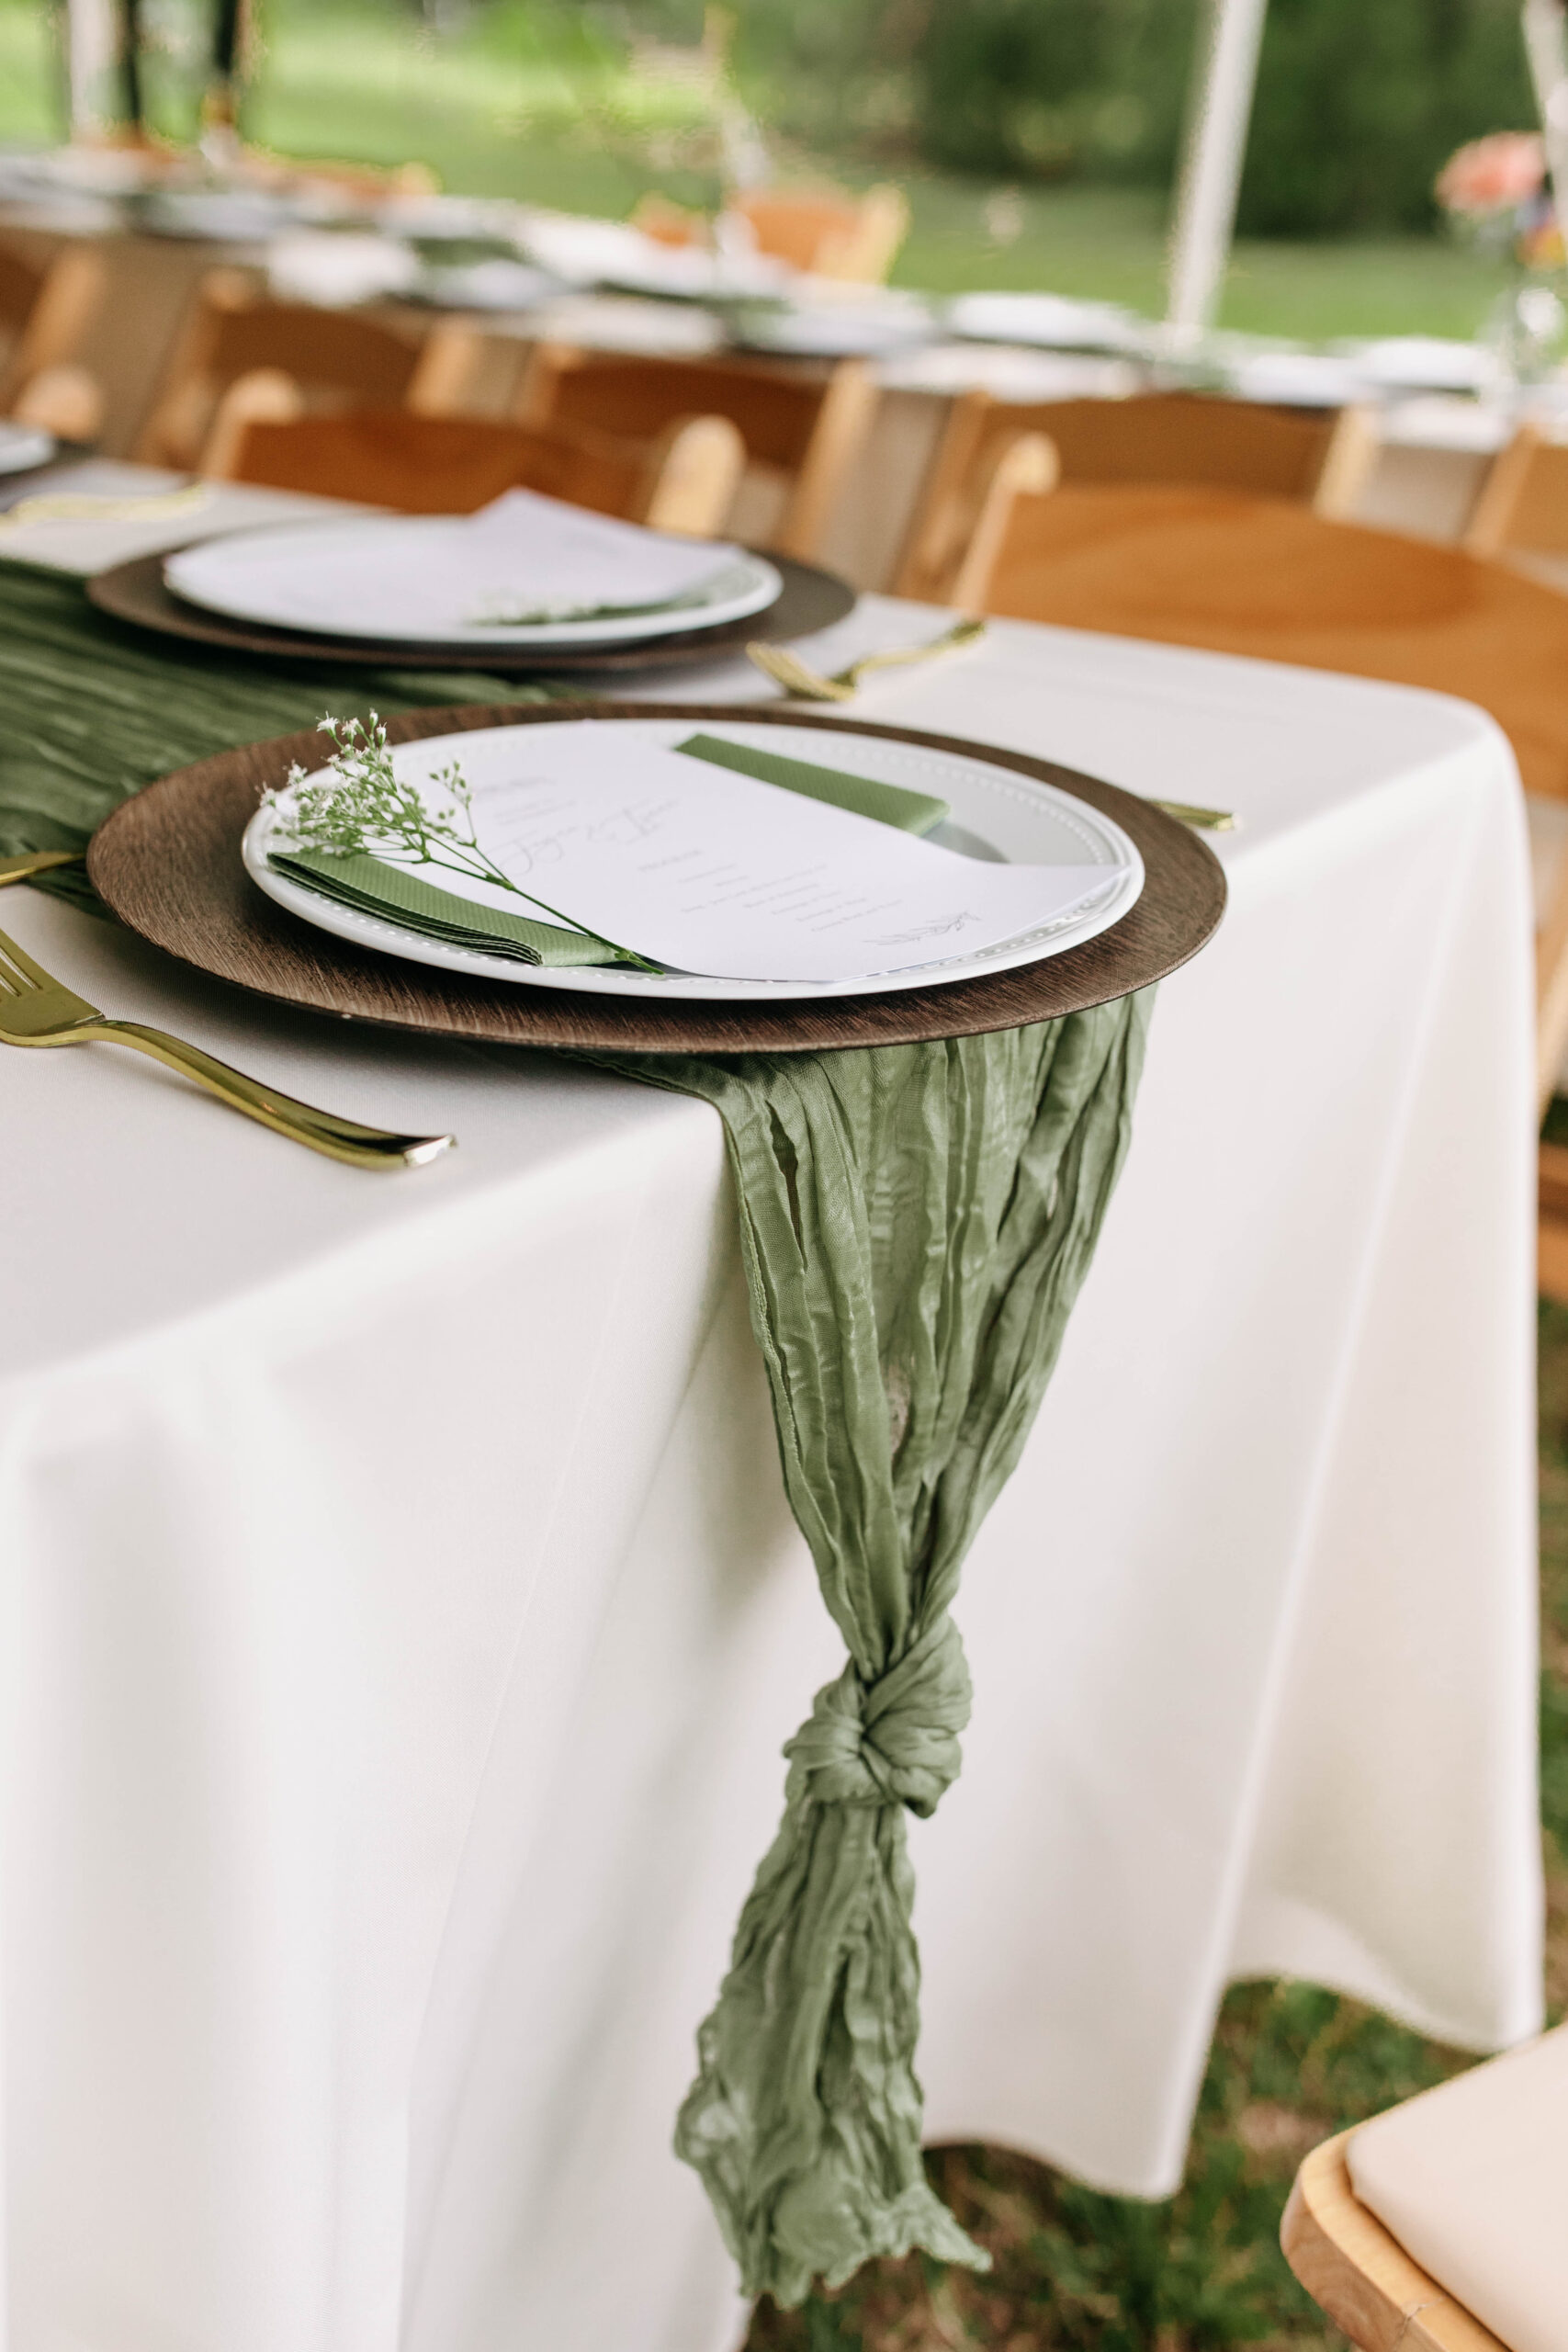 Photograph of green garden wedding reception decor. The wedding was an outdoor tent wedding with wooden chairs and white tablecloths. In this photo you can see the gold silverware, baby breath reception setting decor, and the wooden table chargers.